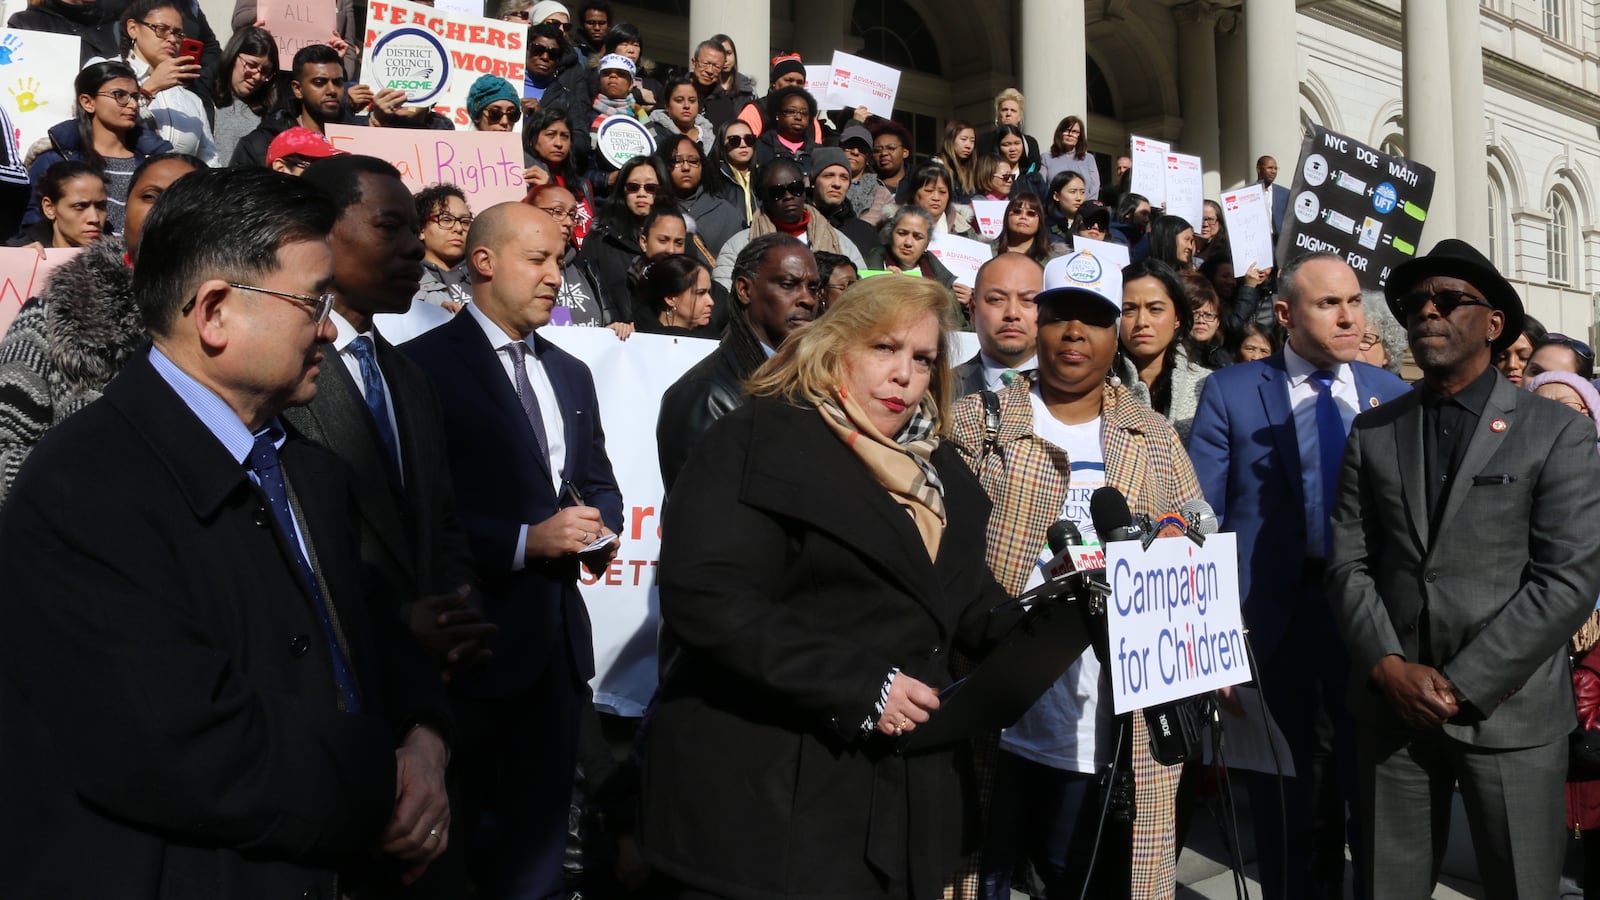 Kim Medina, the head of District Council 1707, spoke at a rally at City Hall to demand that pre-K teachers in community organizations are paid equally to education department teachers on March 20, 2019.